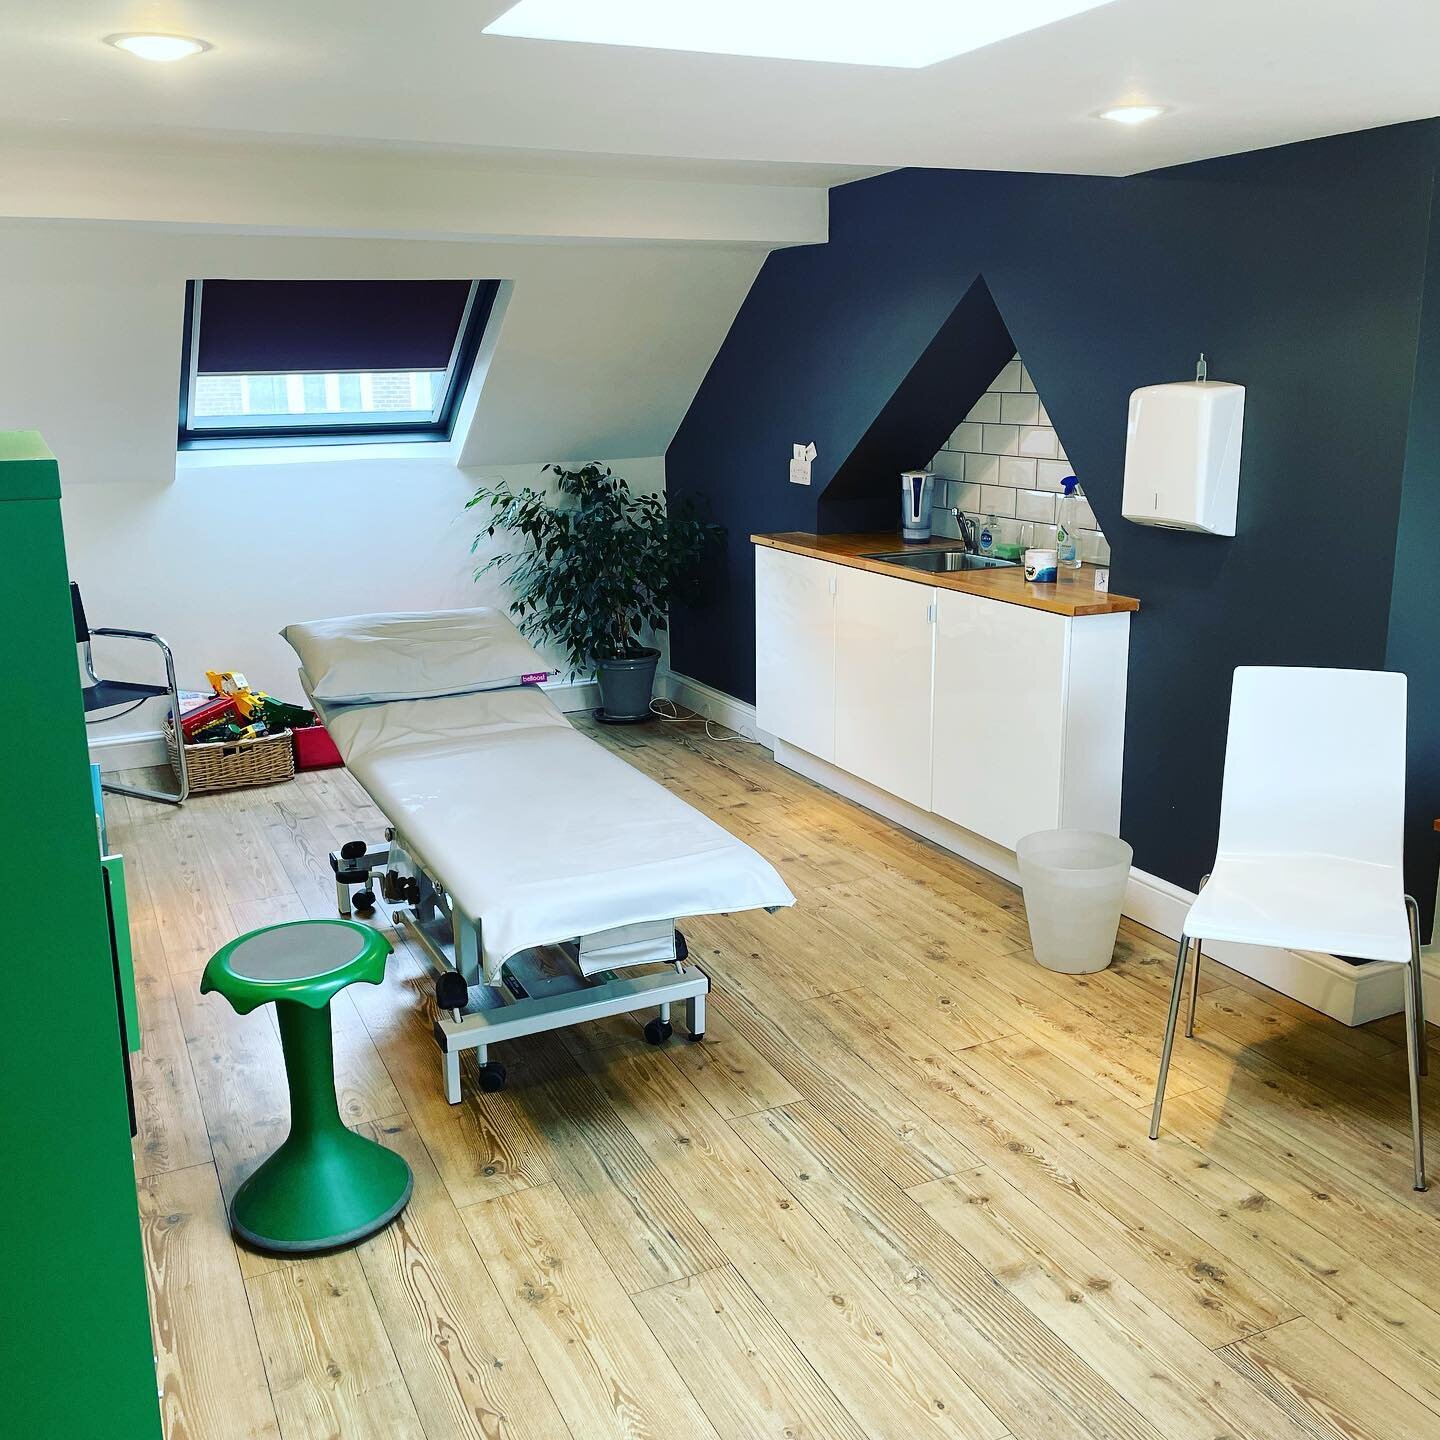 All set for the day ahead. We&rsquo;re open from 8am-3pm, Clio &amp; Graham at the helm. 

📞 01342 823722
✉️ admin@froc.co.uk
💻 froc.co.uk

#ForestRow #EastGrinstead #uckfield #sussex #sussexbusiness #TunbridgeWells #Osteopathy #Osteopath #Osteopat